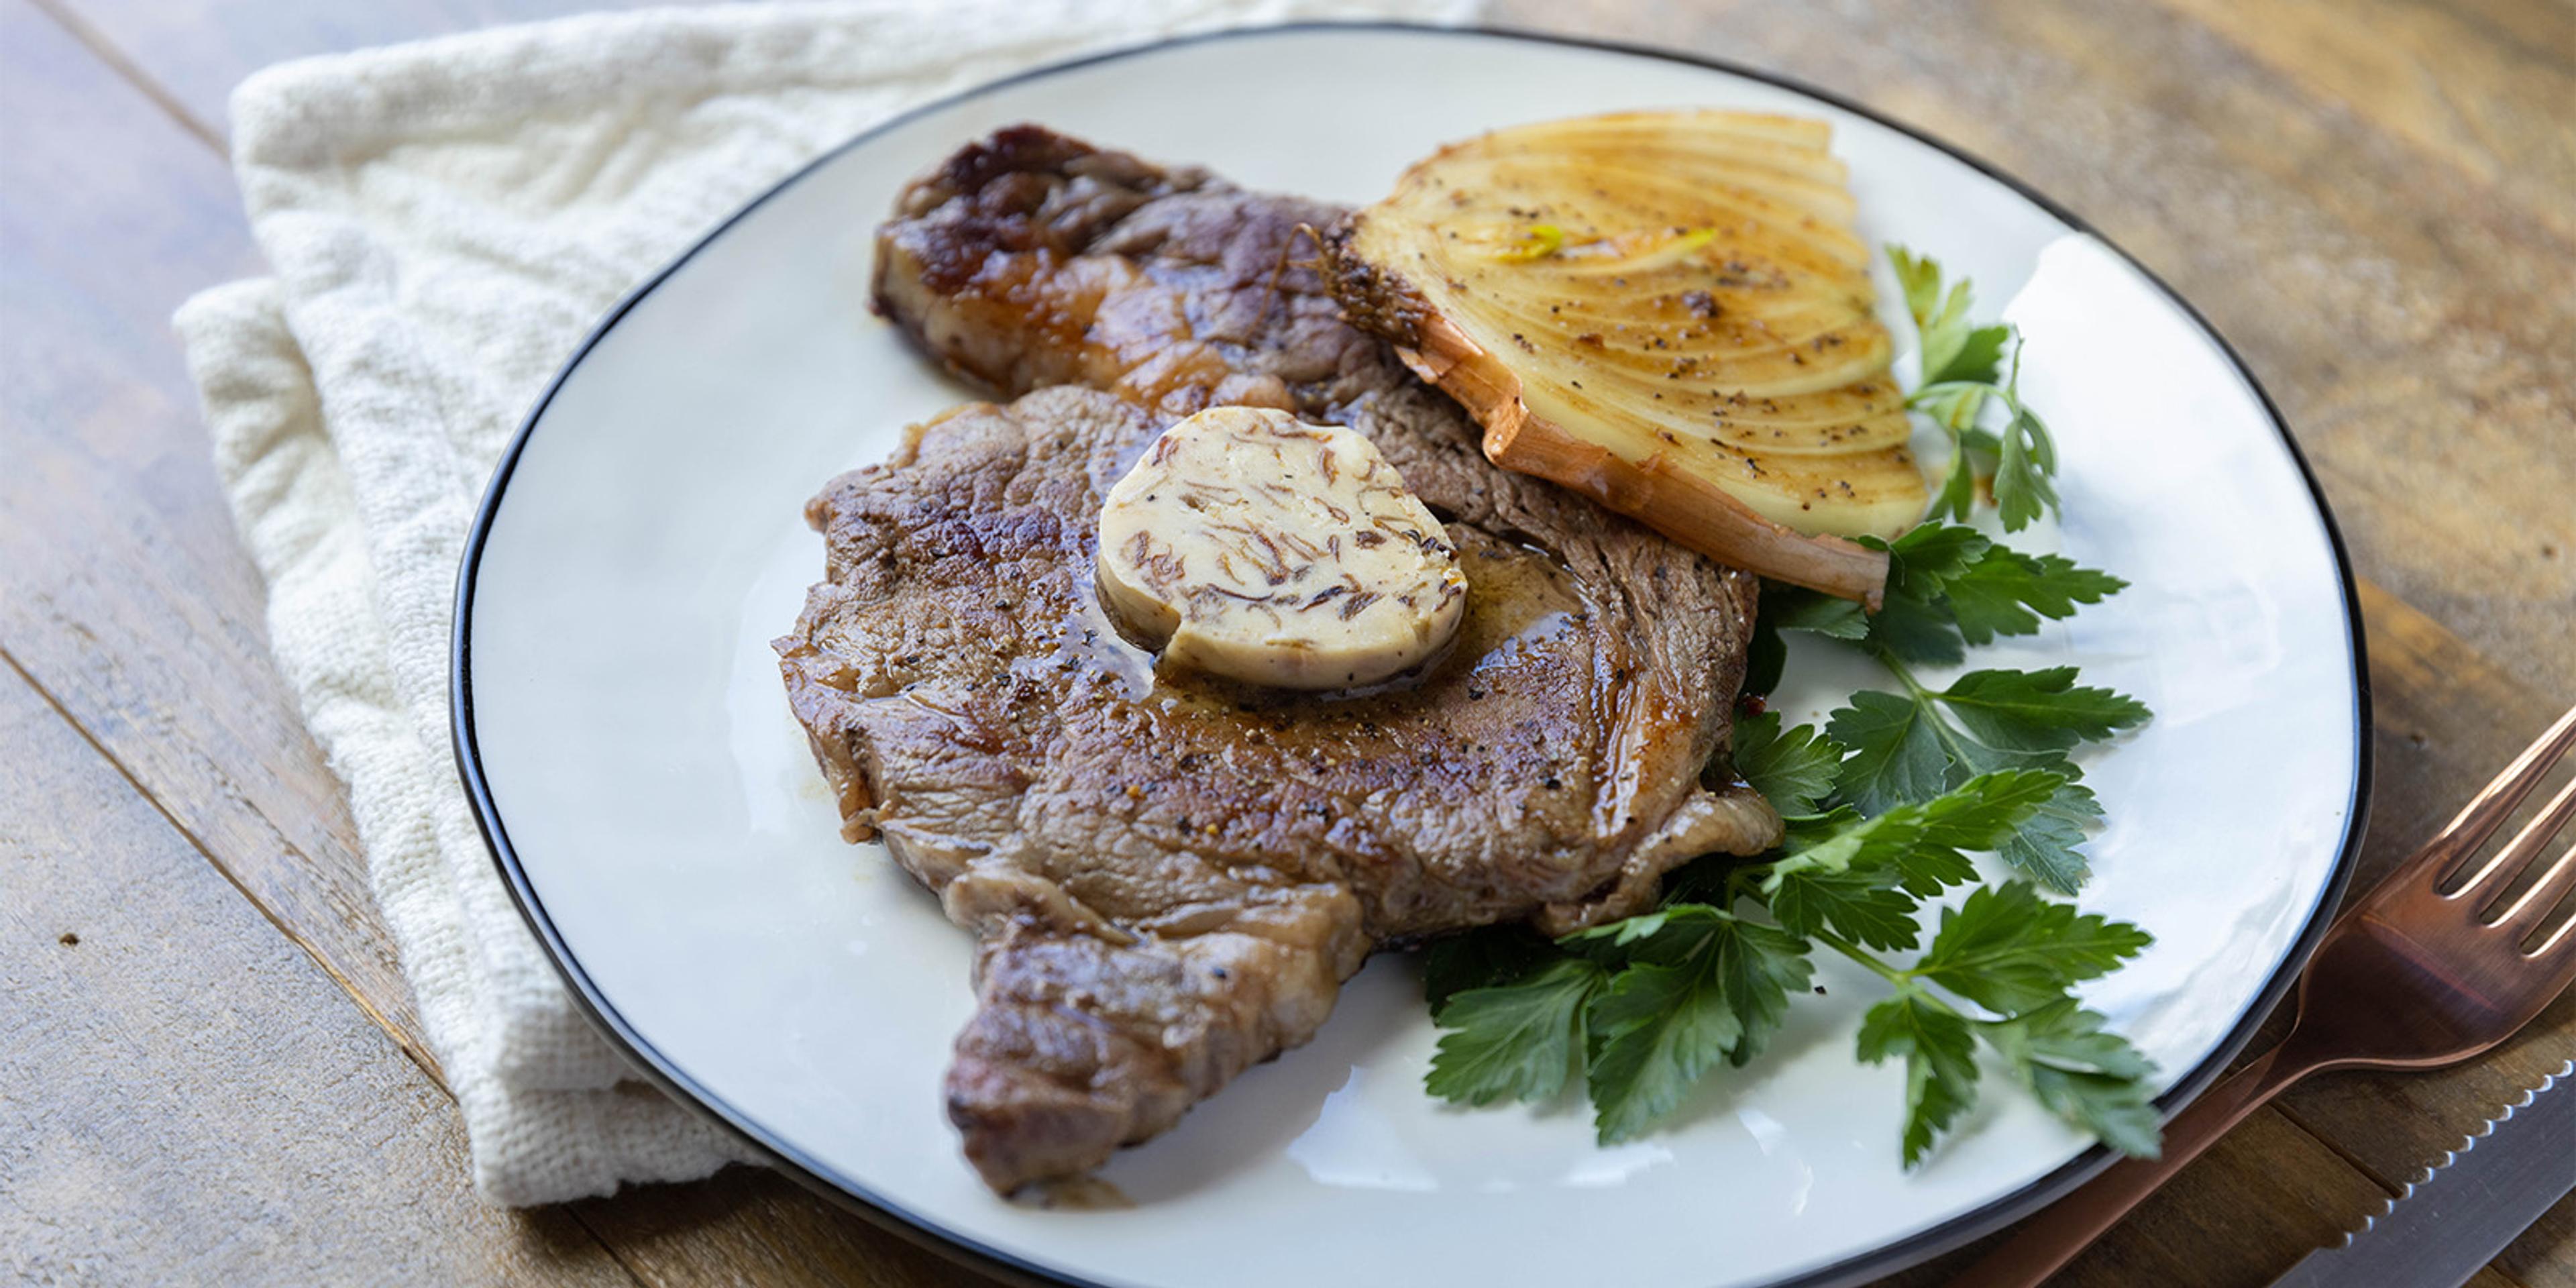 Caramelized Onion Compound Butter on top of a steak garnished with parsley.